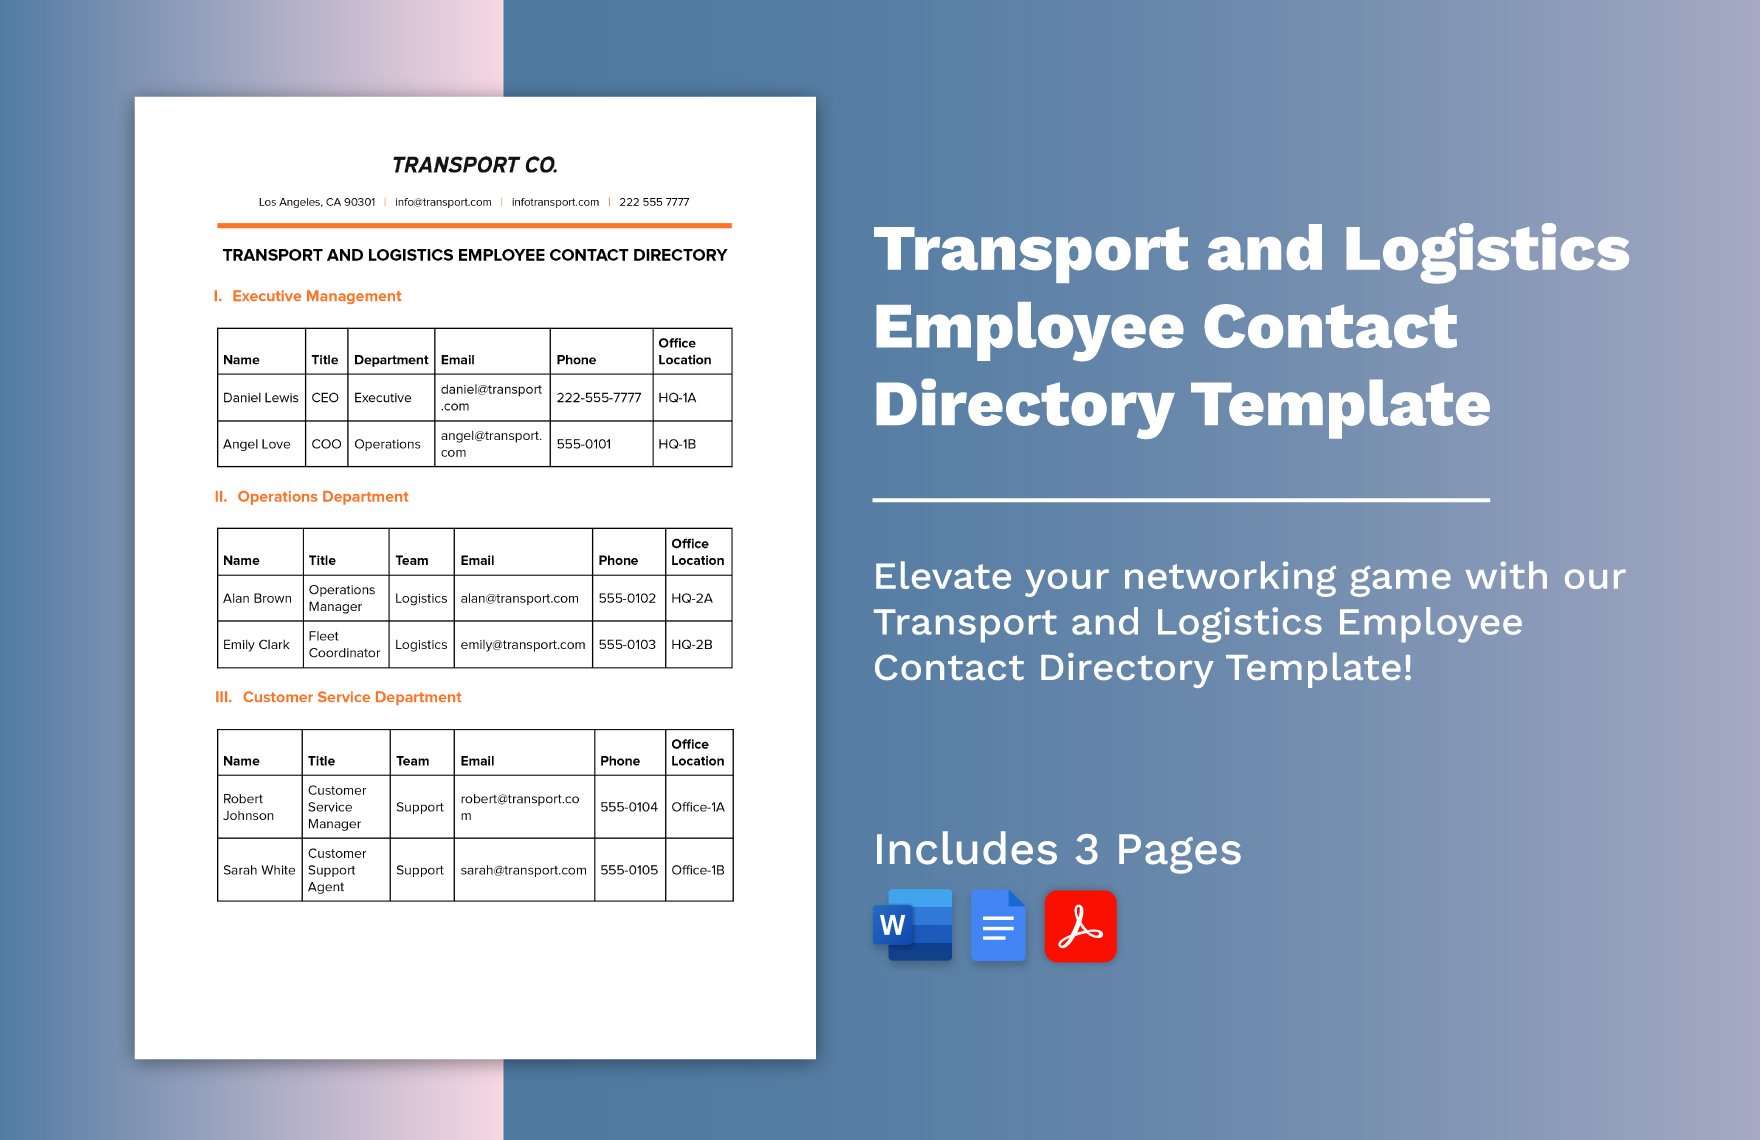 Transport and Logistics Employee Contact Directory Template